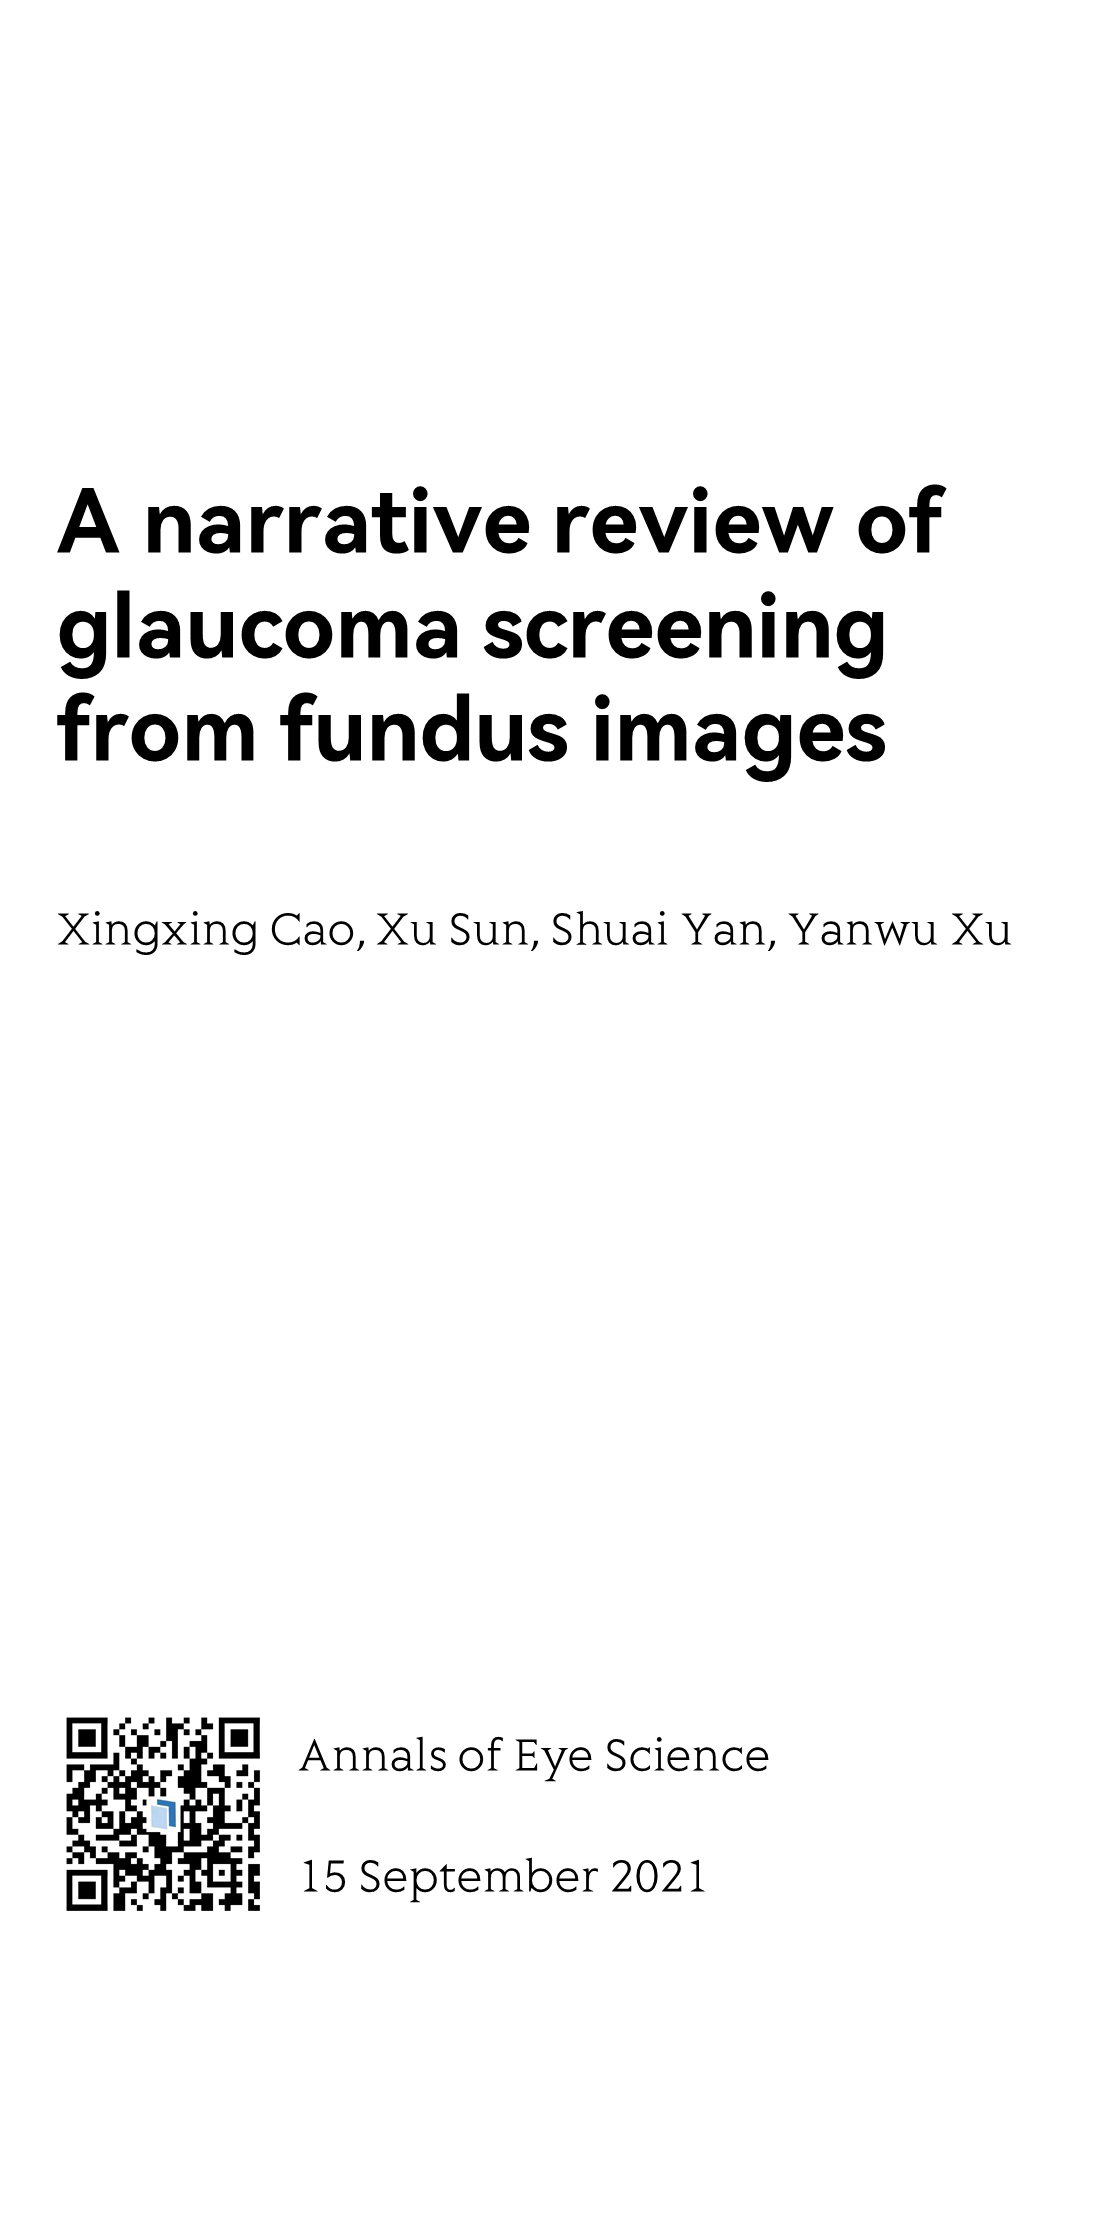 A narrative review of glaucoma screening from fundus images_1